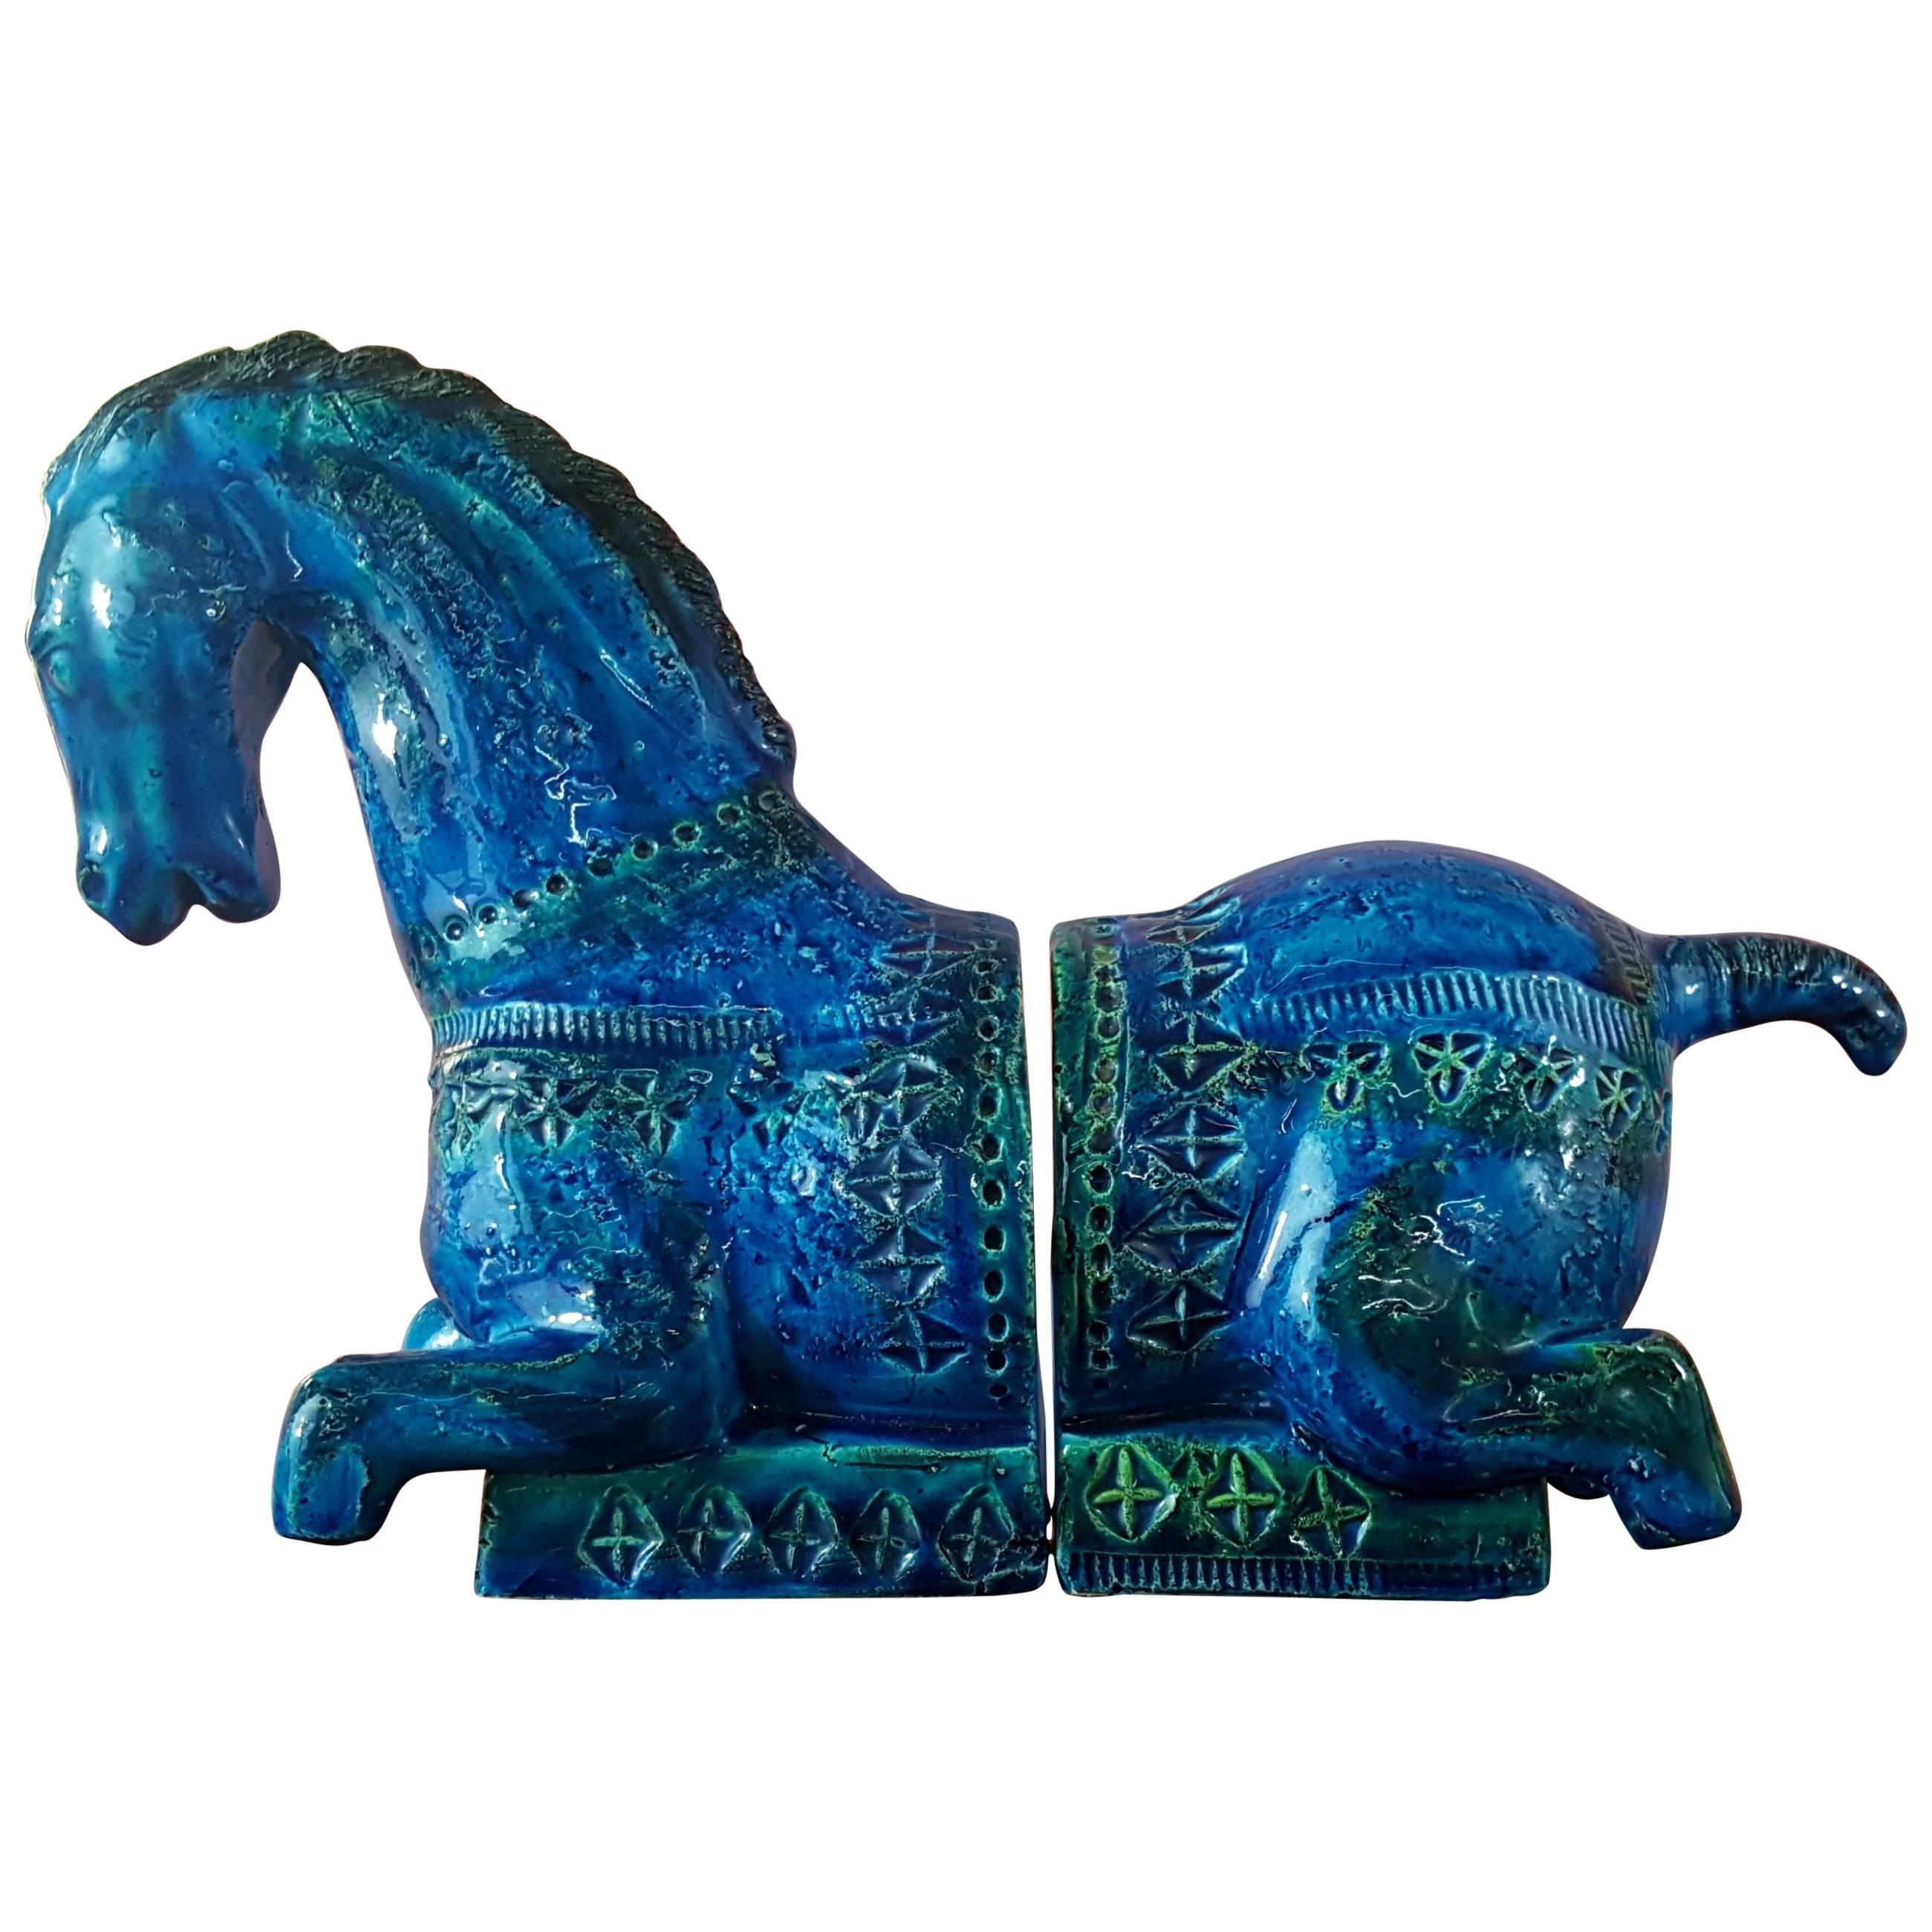 Aldo Londi for Bitossi 'Tang Horse' Bookends